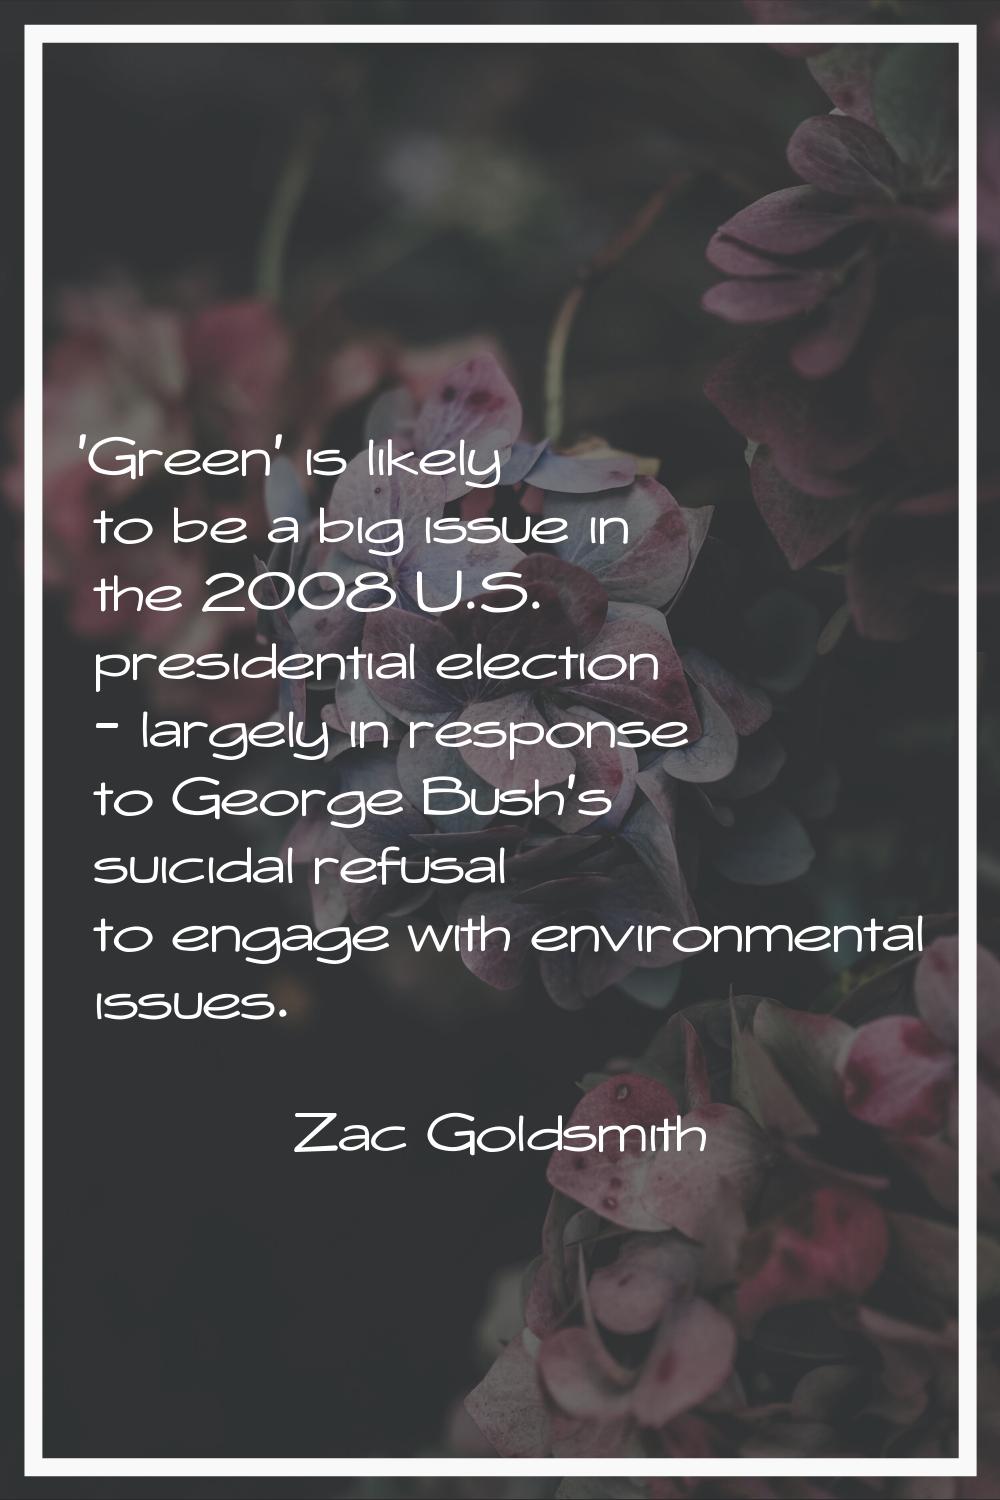 'Green' is likely to be a big issue in the 2008 U.S. presidential election - largely in response to